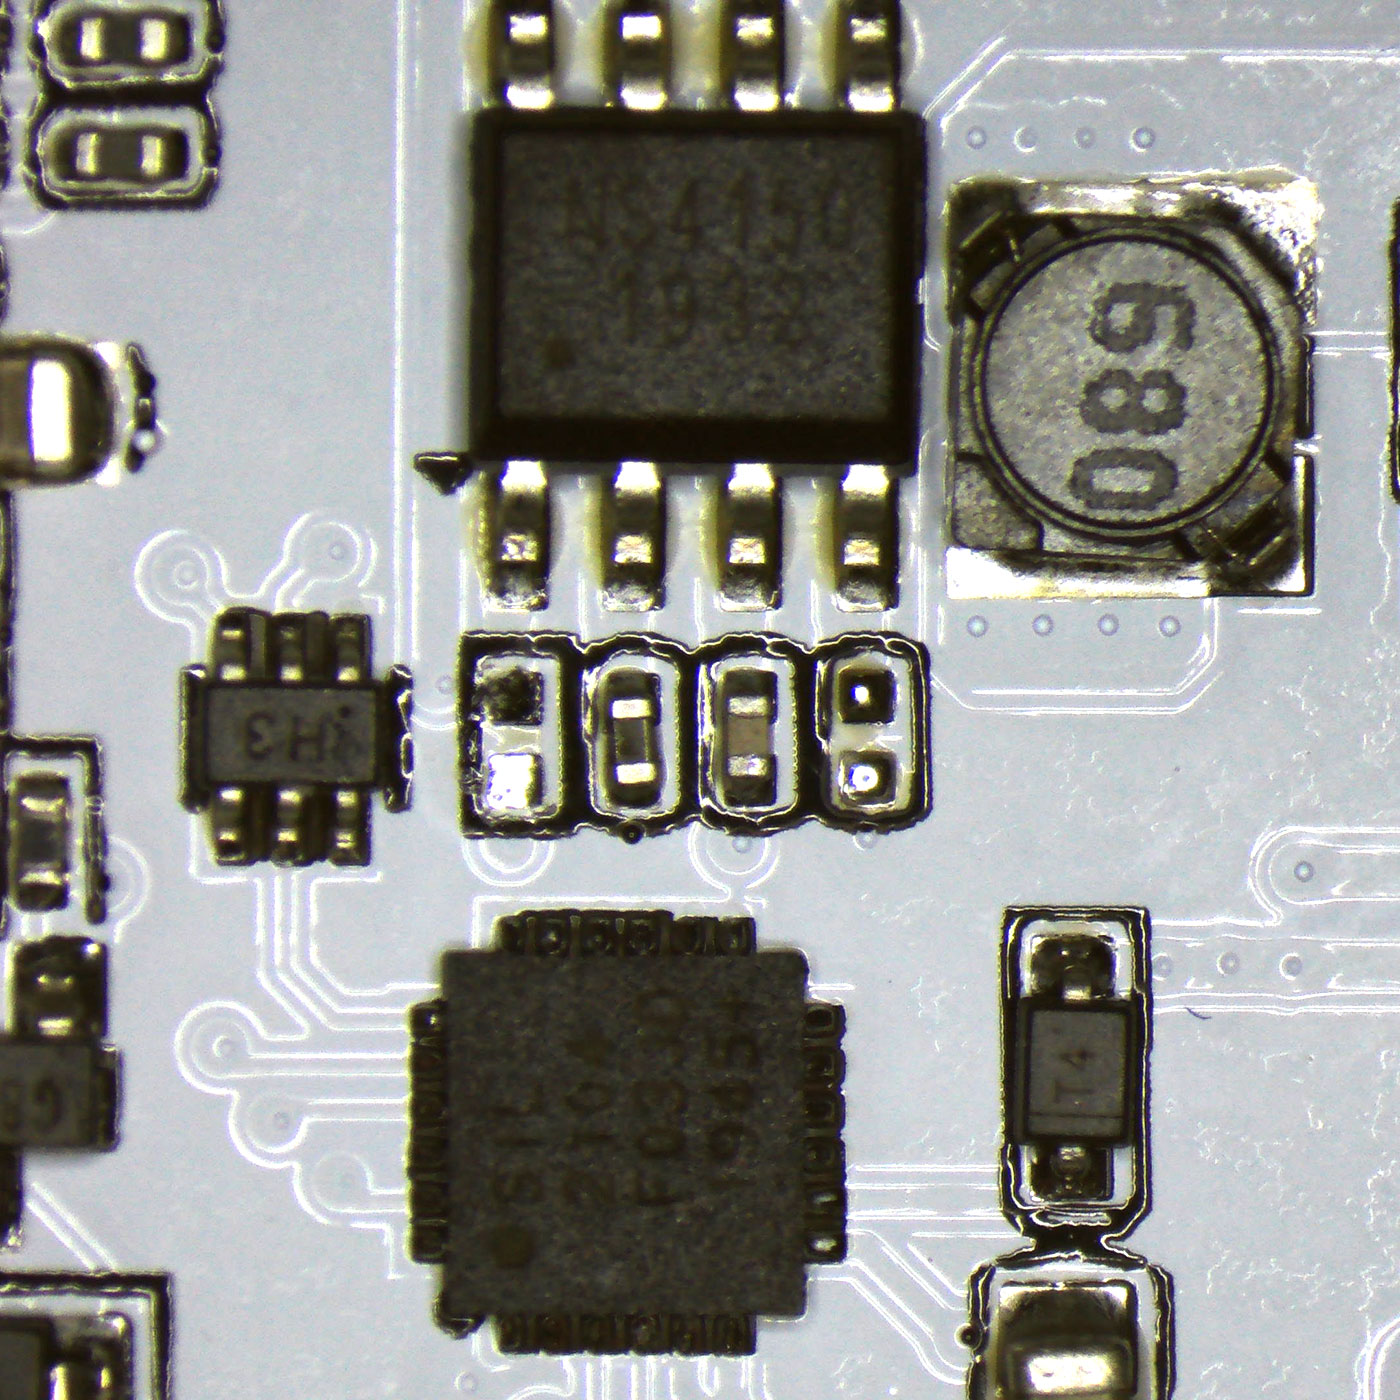 Resistor R32 audio pullup removed